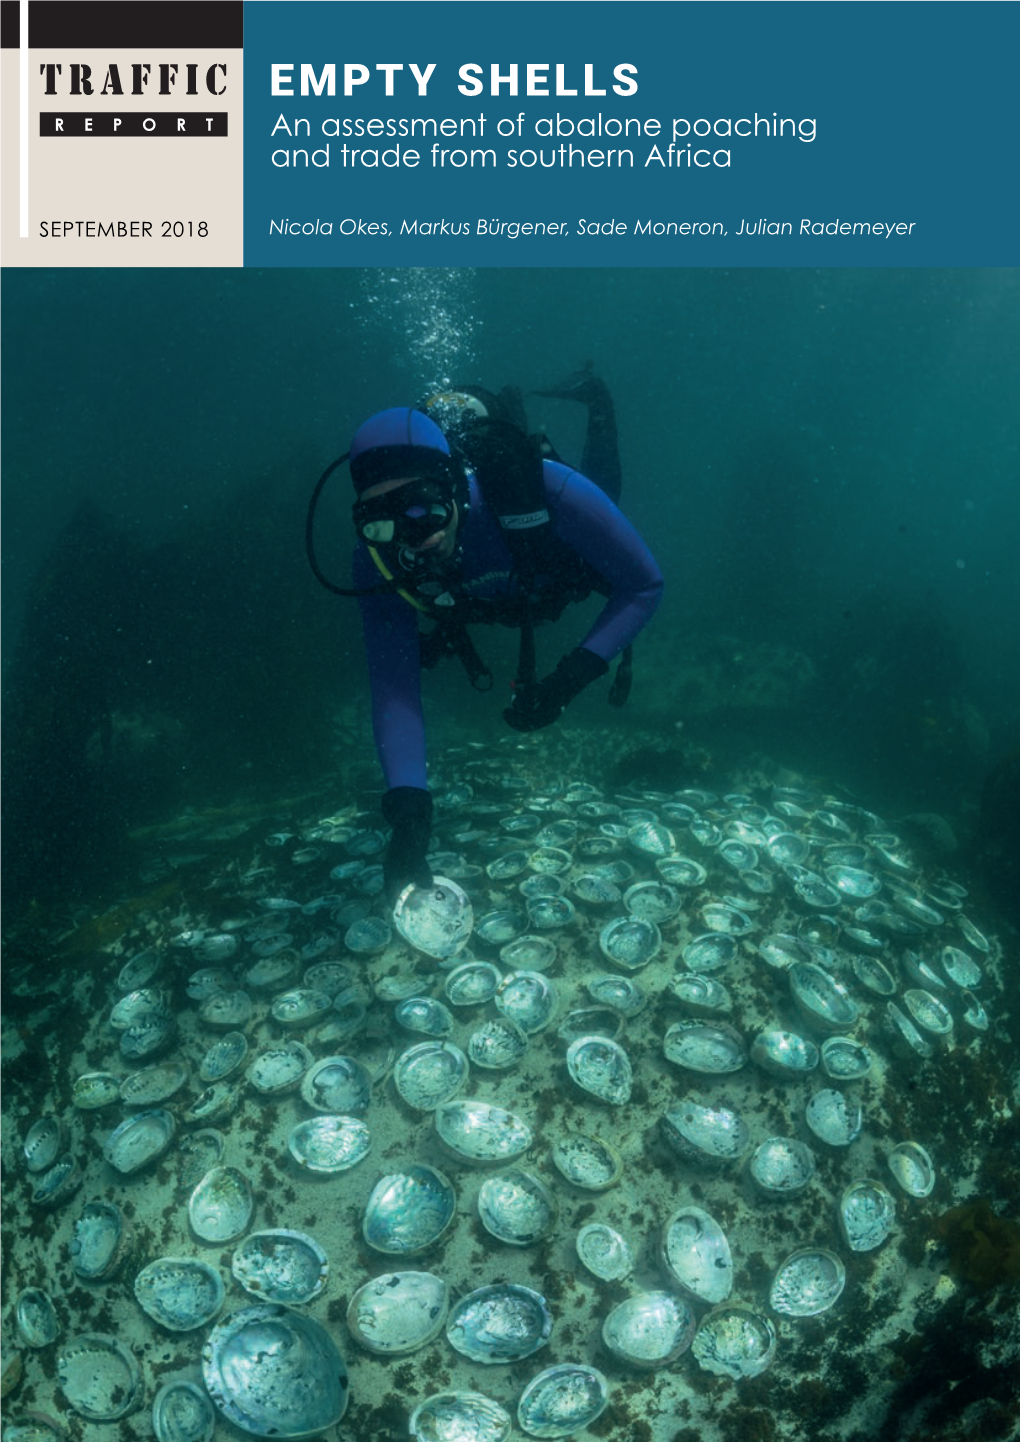 EMPTY SHELLS REPORT an Assessment of Abalone Poaching and Trade from Southern Africa